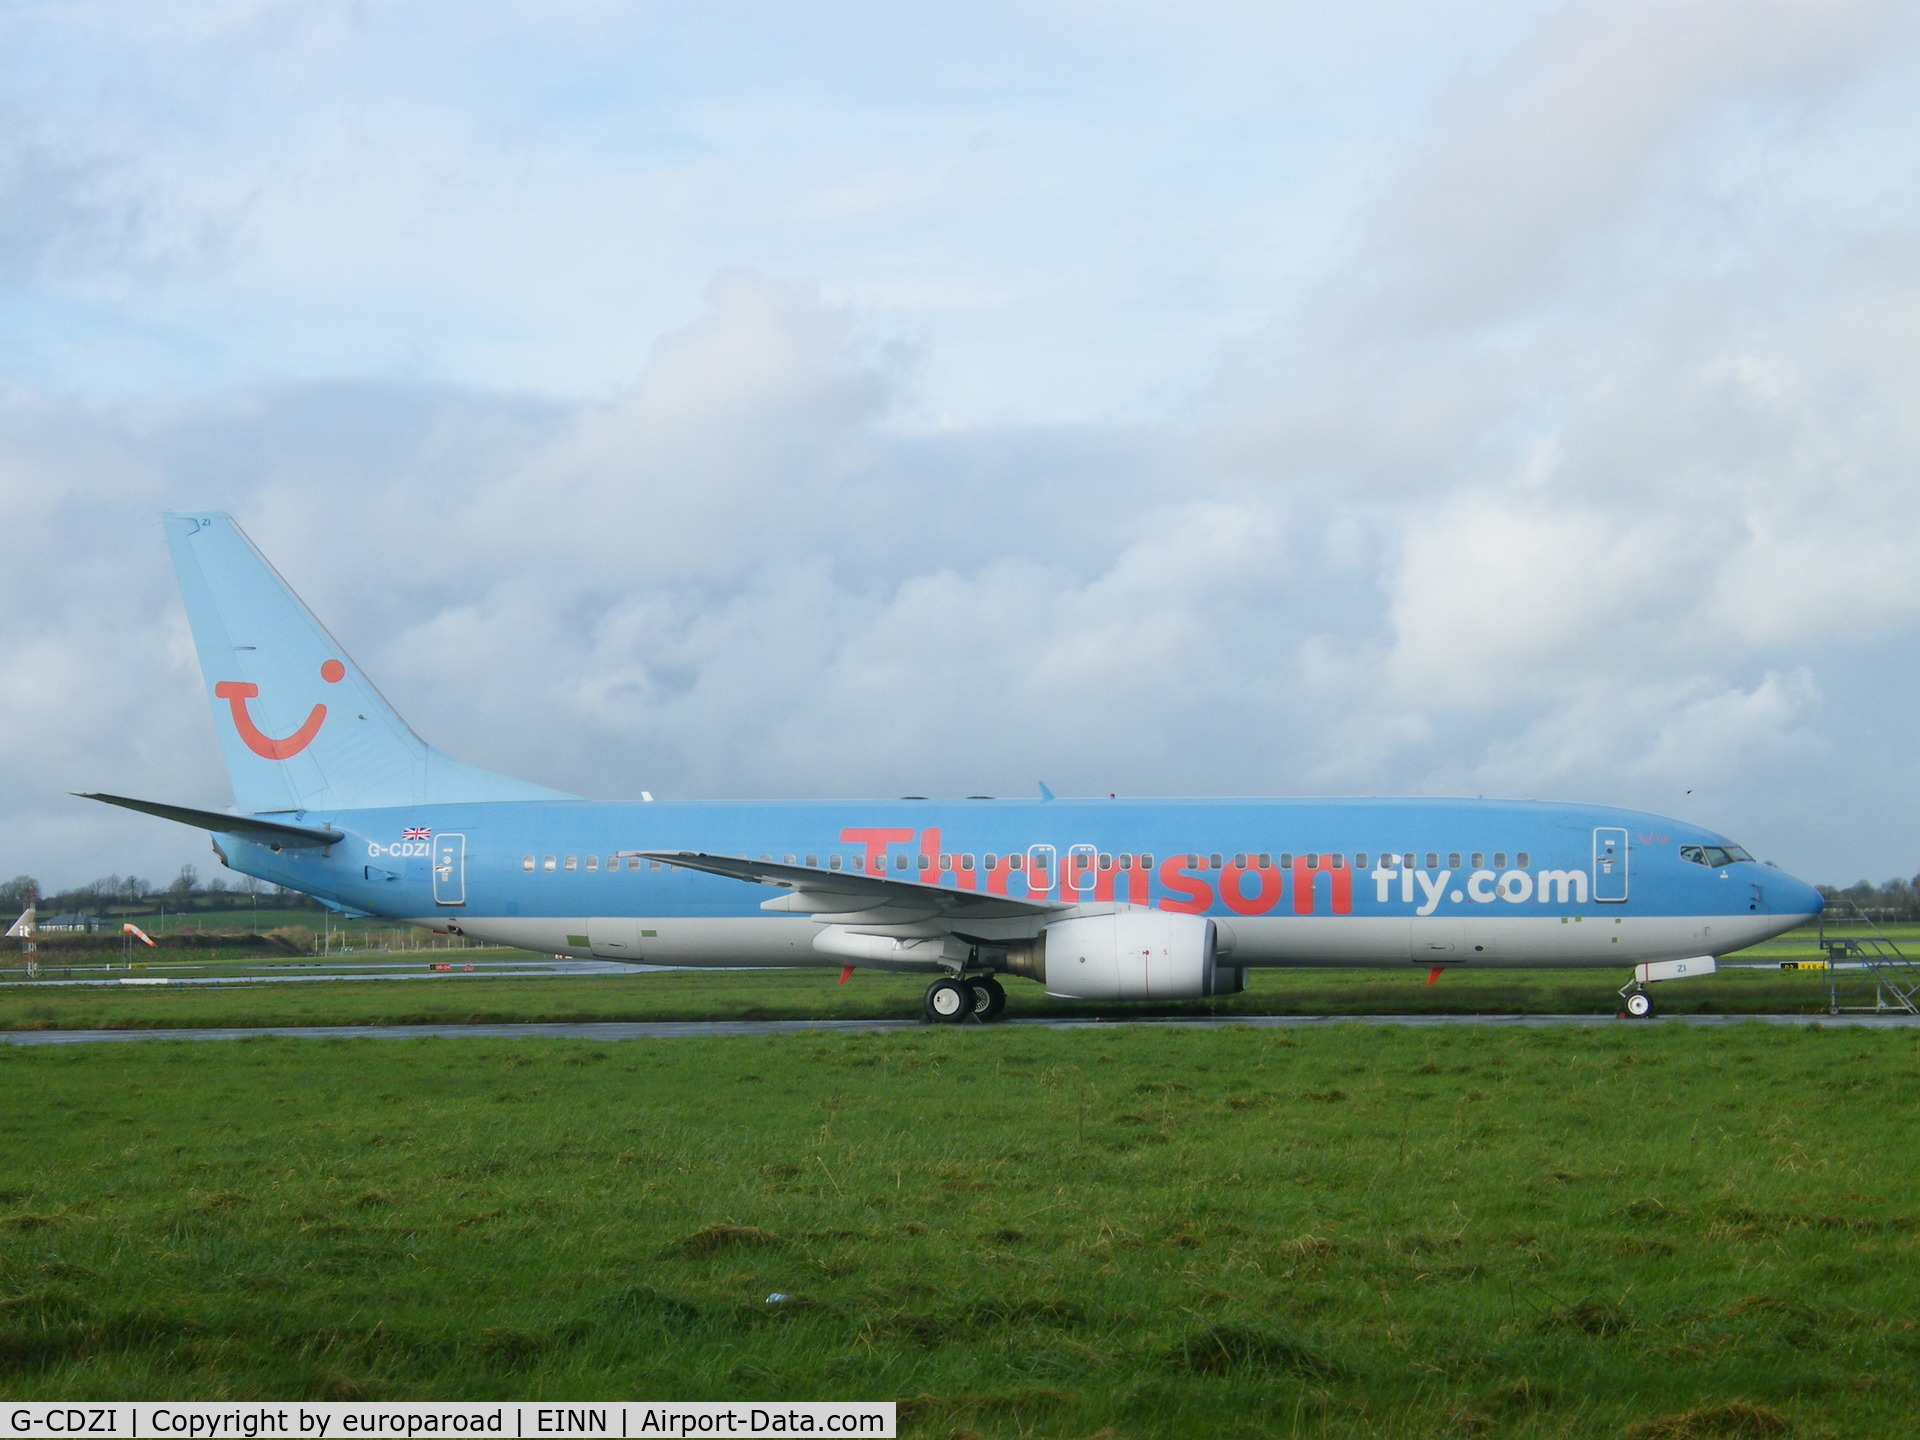 G-CDZI, 2000 Boeing 737-804 C/N 28229, This aircraft arrived for painting at shannon for painting into jet 2